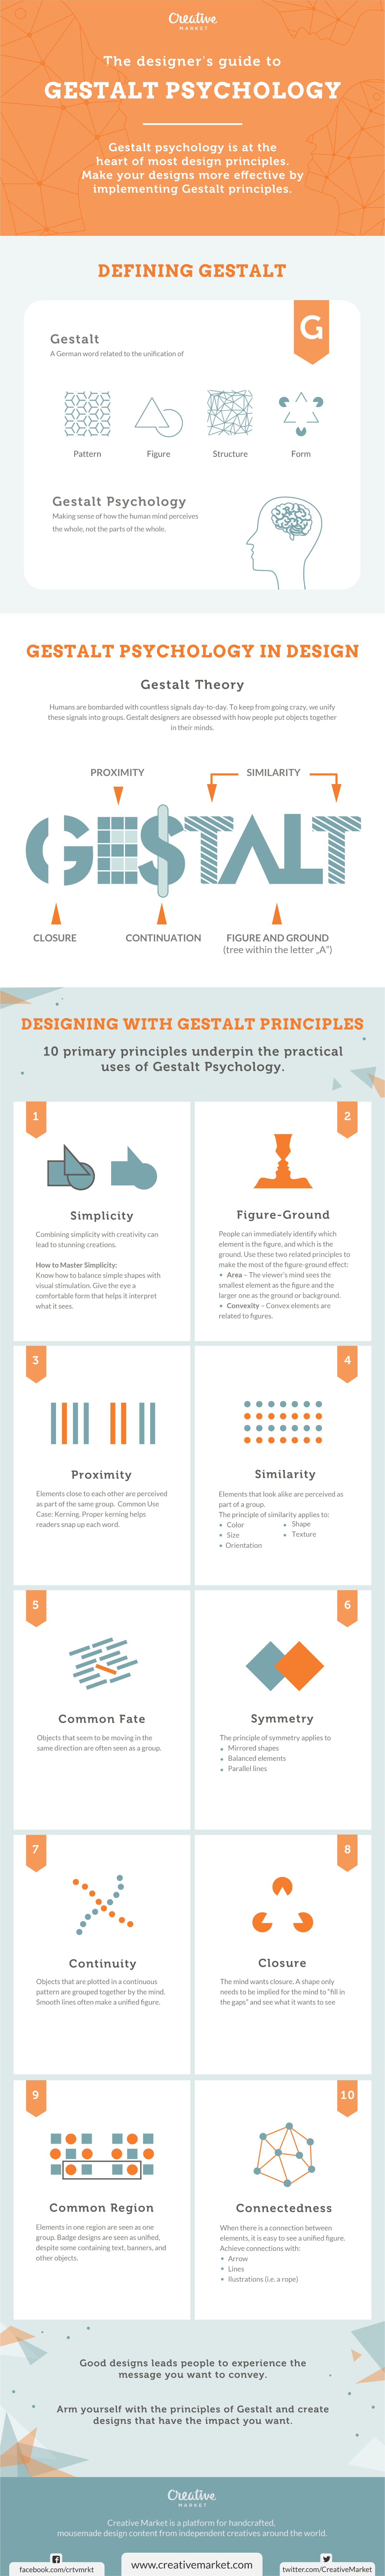 Master Web and Graphic design: The Designer's Guide to Gestalt Psychology - infographic